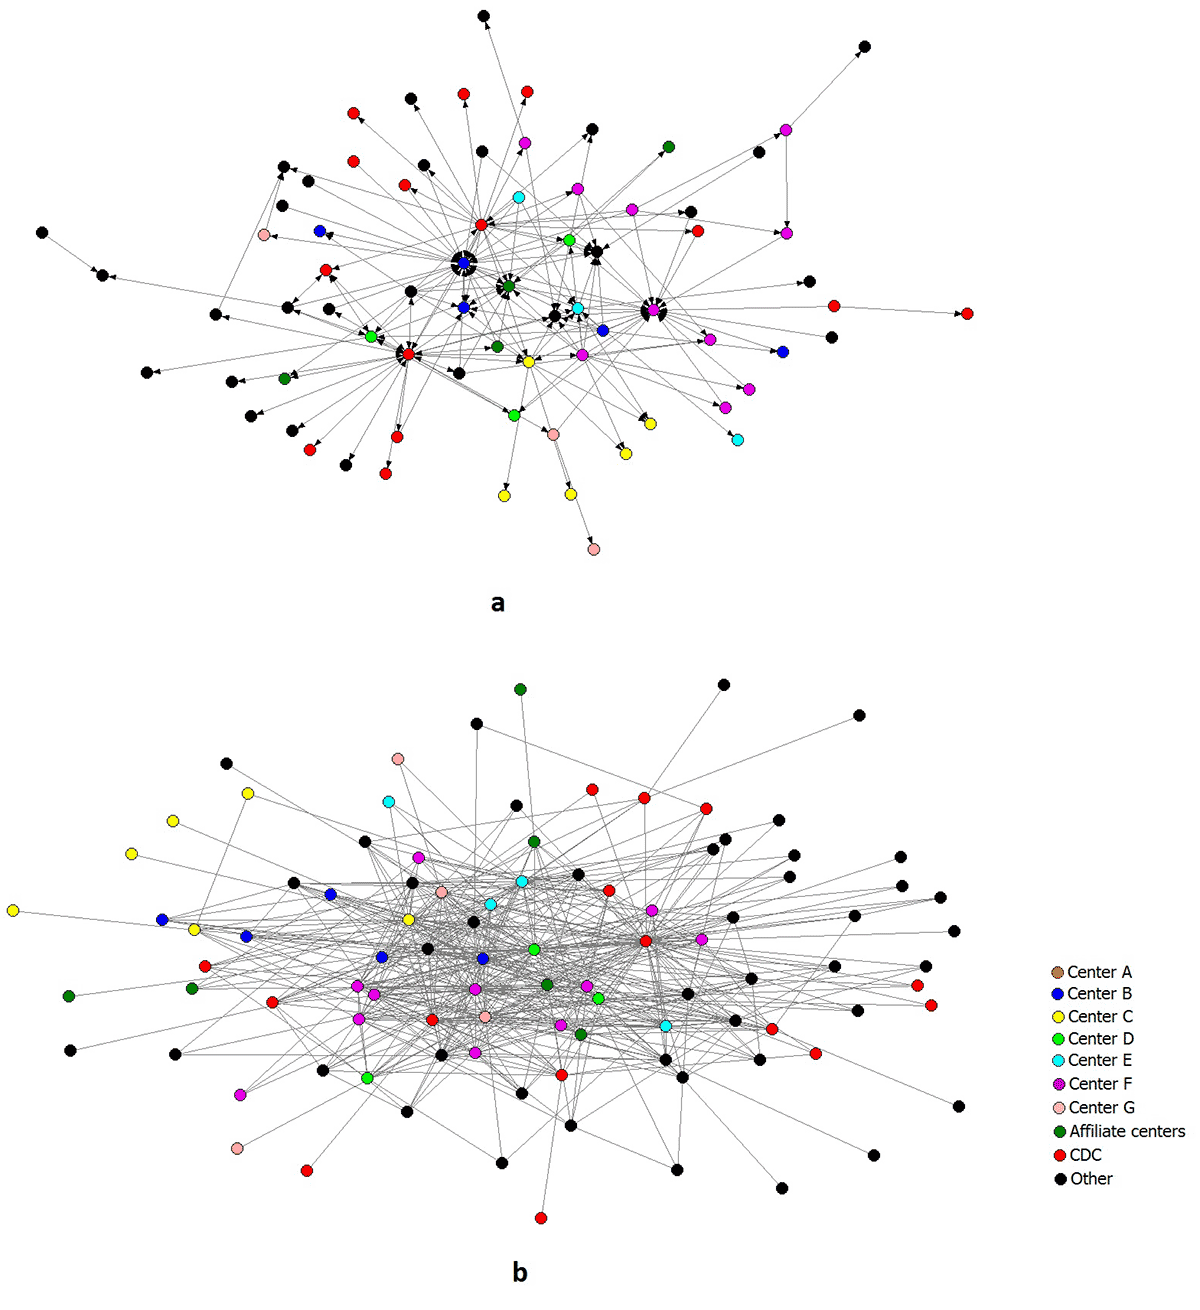 Sociograms of the individual-level mentorship and collaboration networks of the Healthy Aging Research Network members and partners, United States, January 2014.